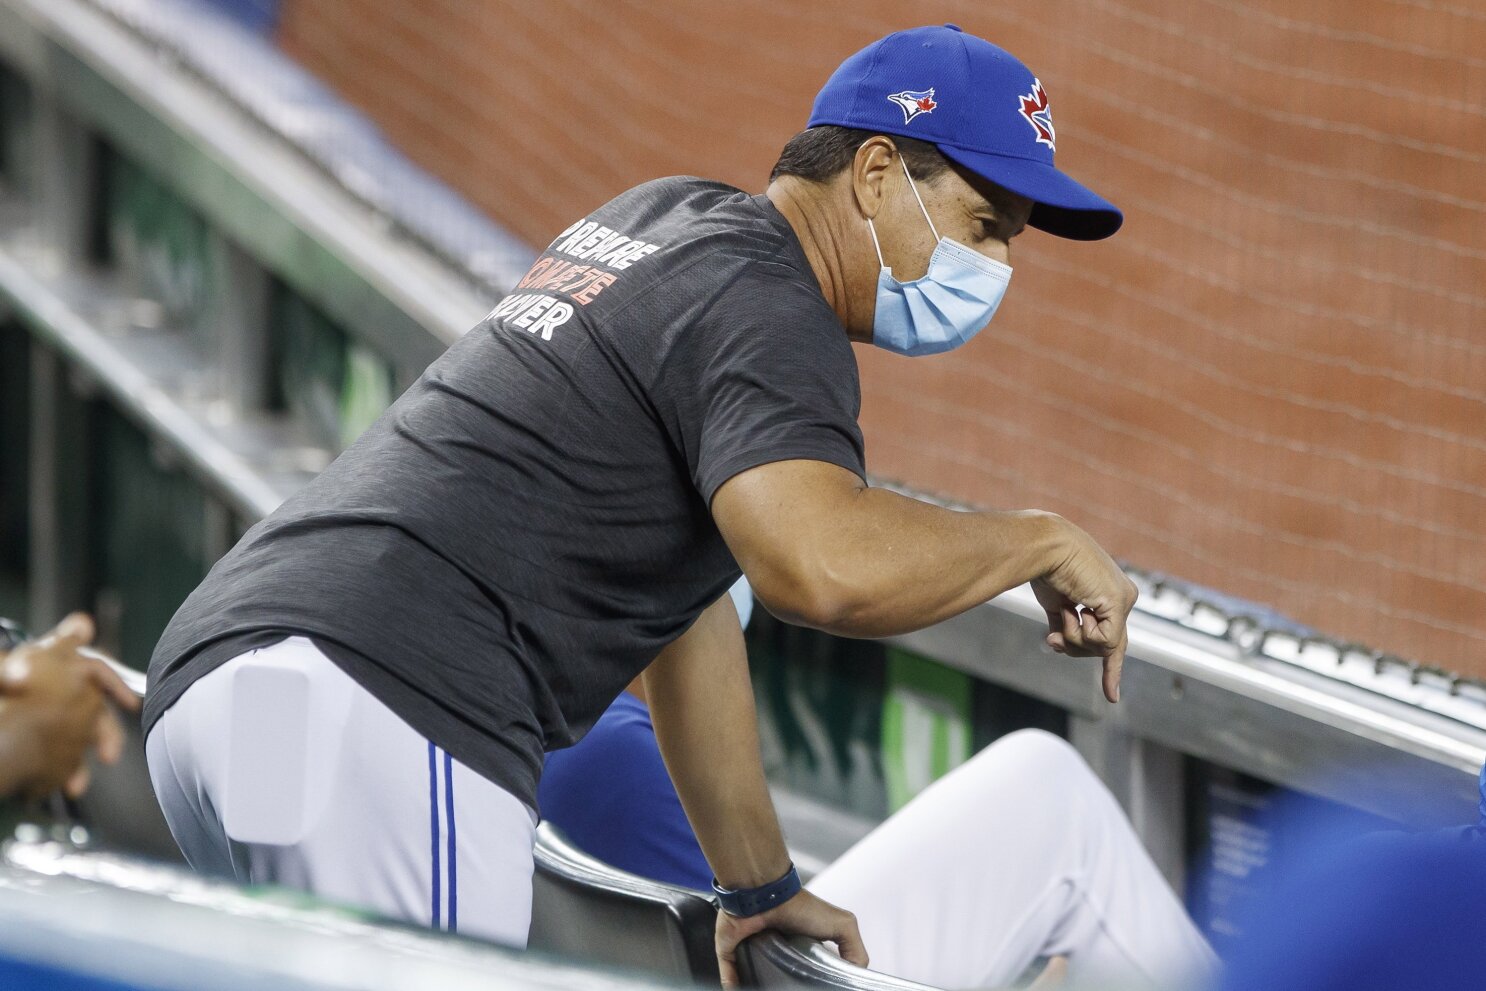 Canada denies Toronto Blue Jays' request to play home games due to pandemic